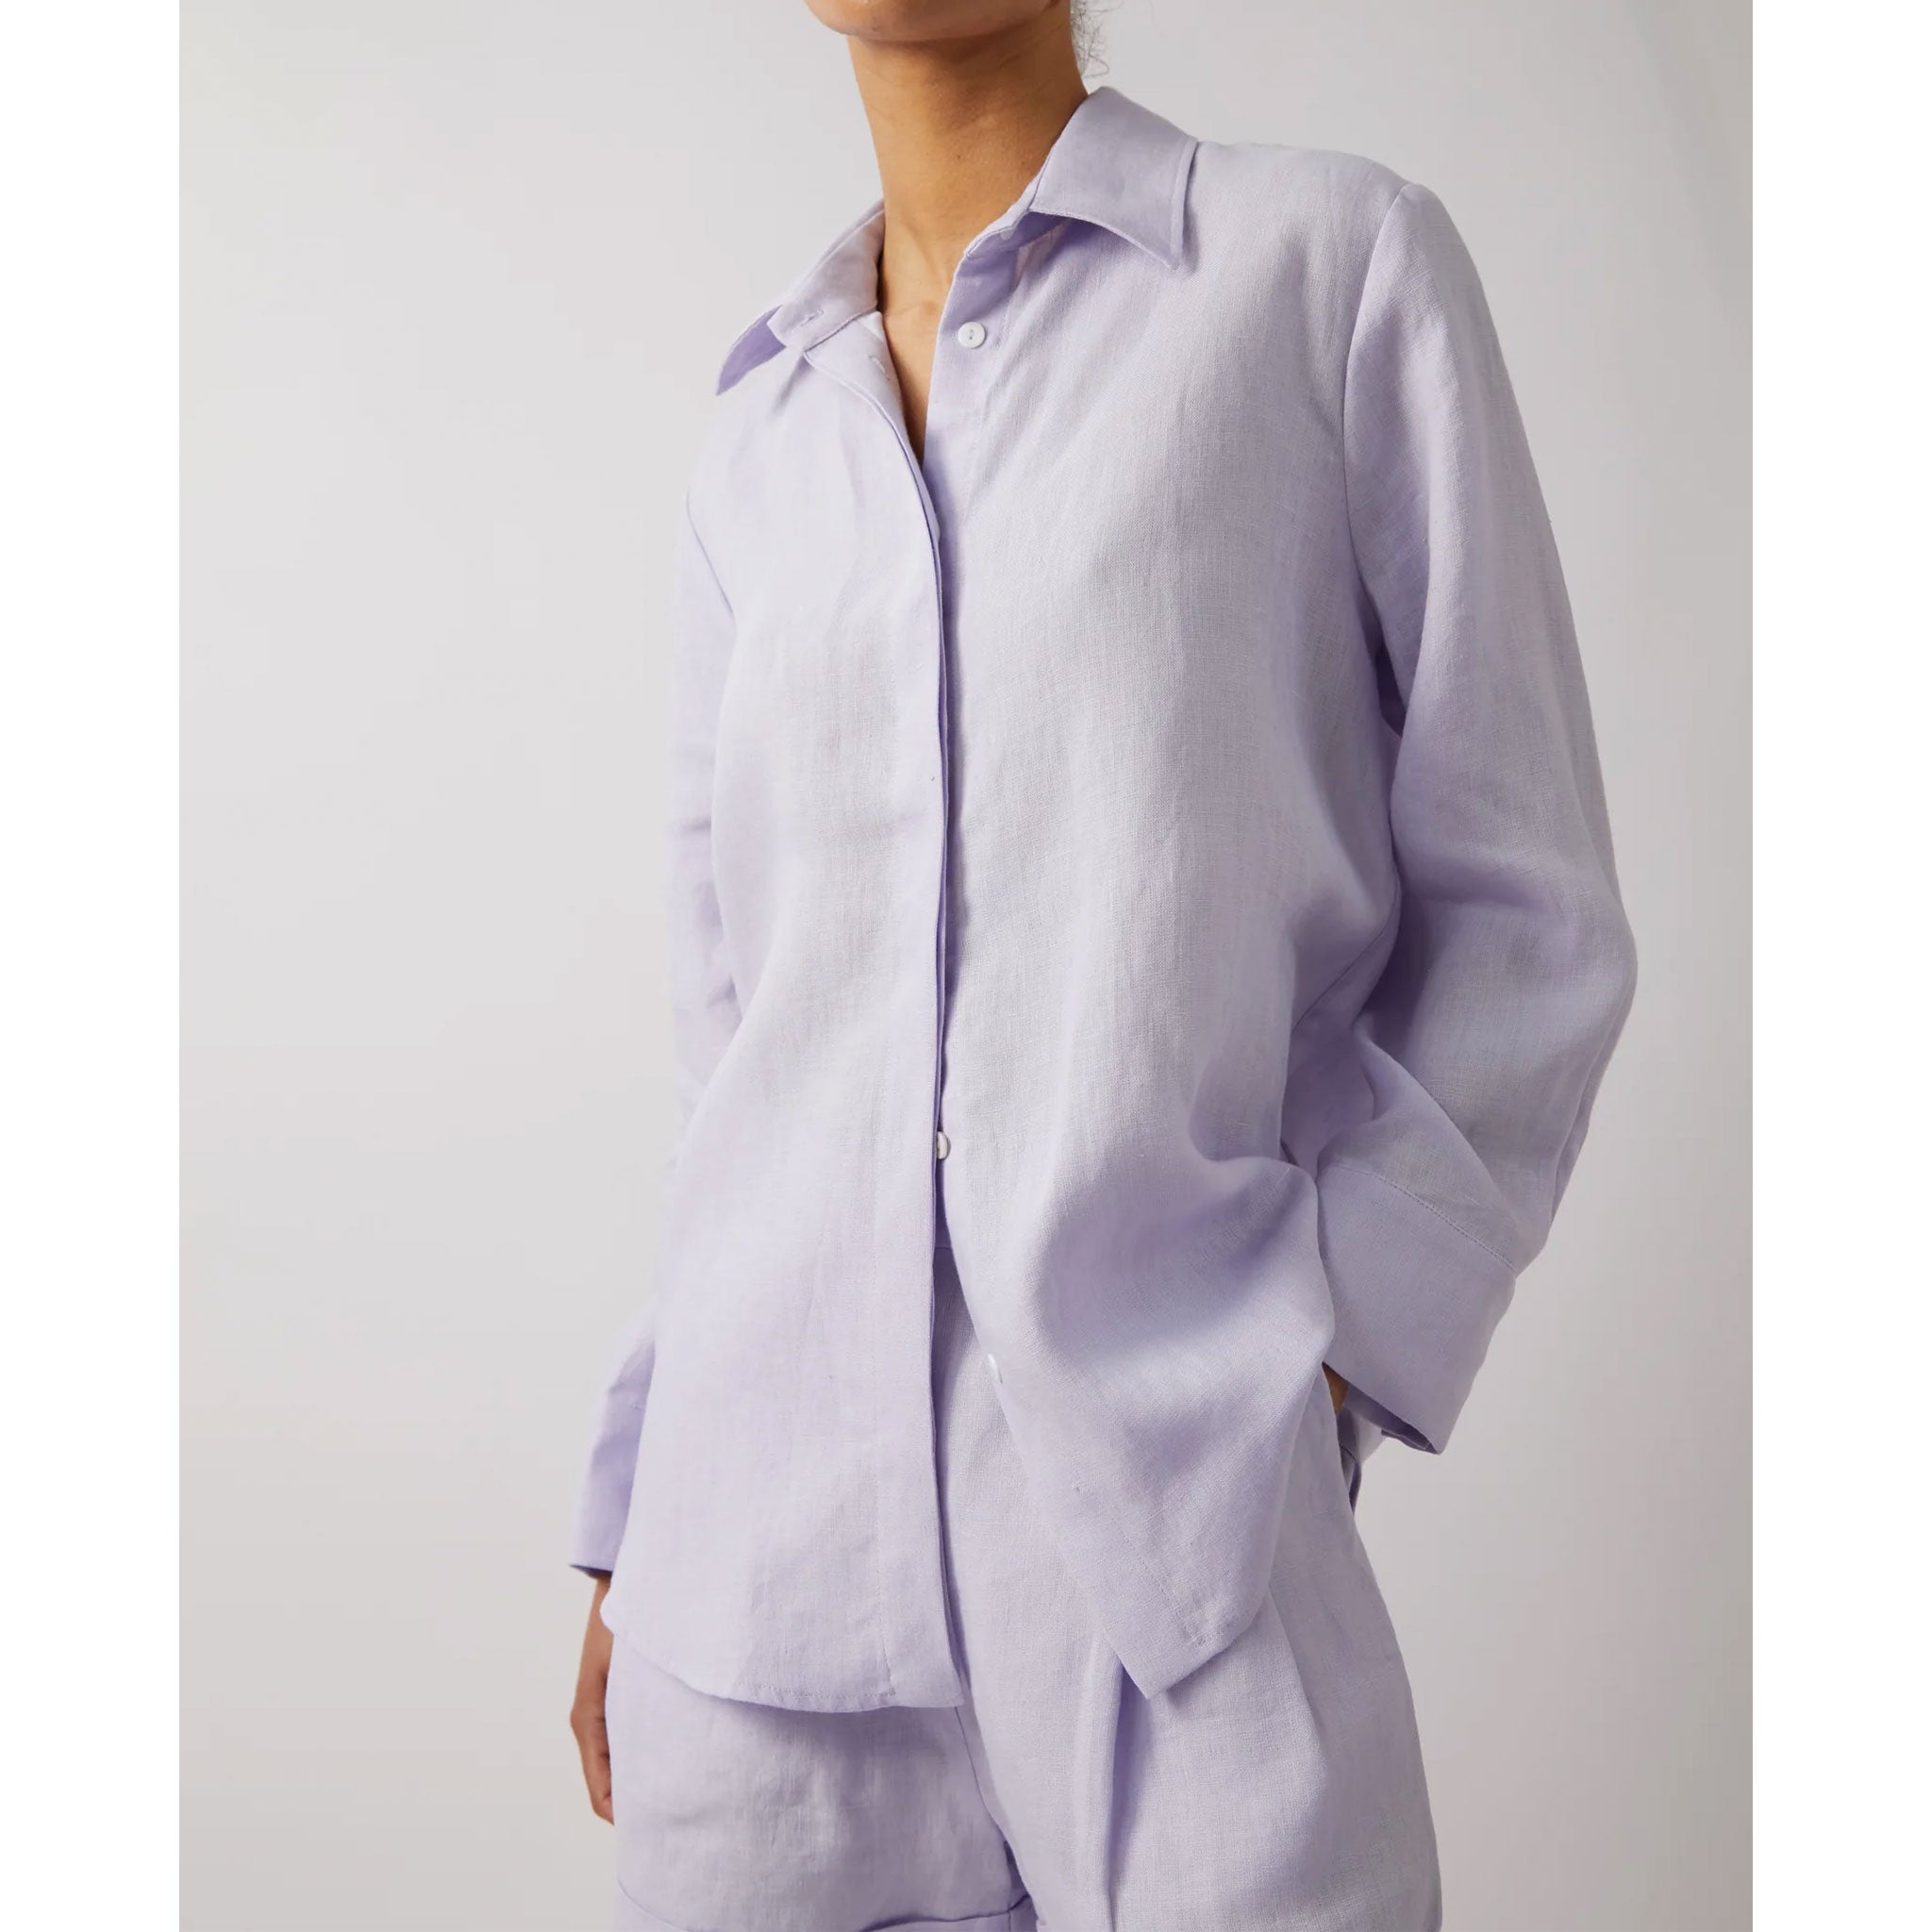 Laia Shirt in Lilac